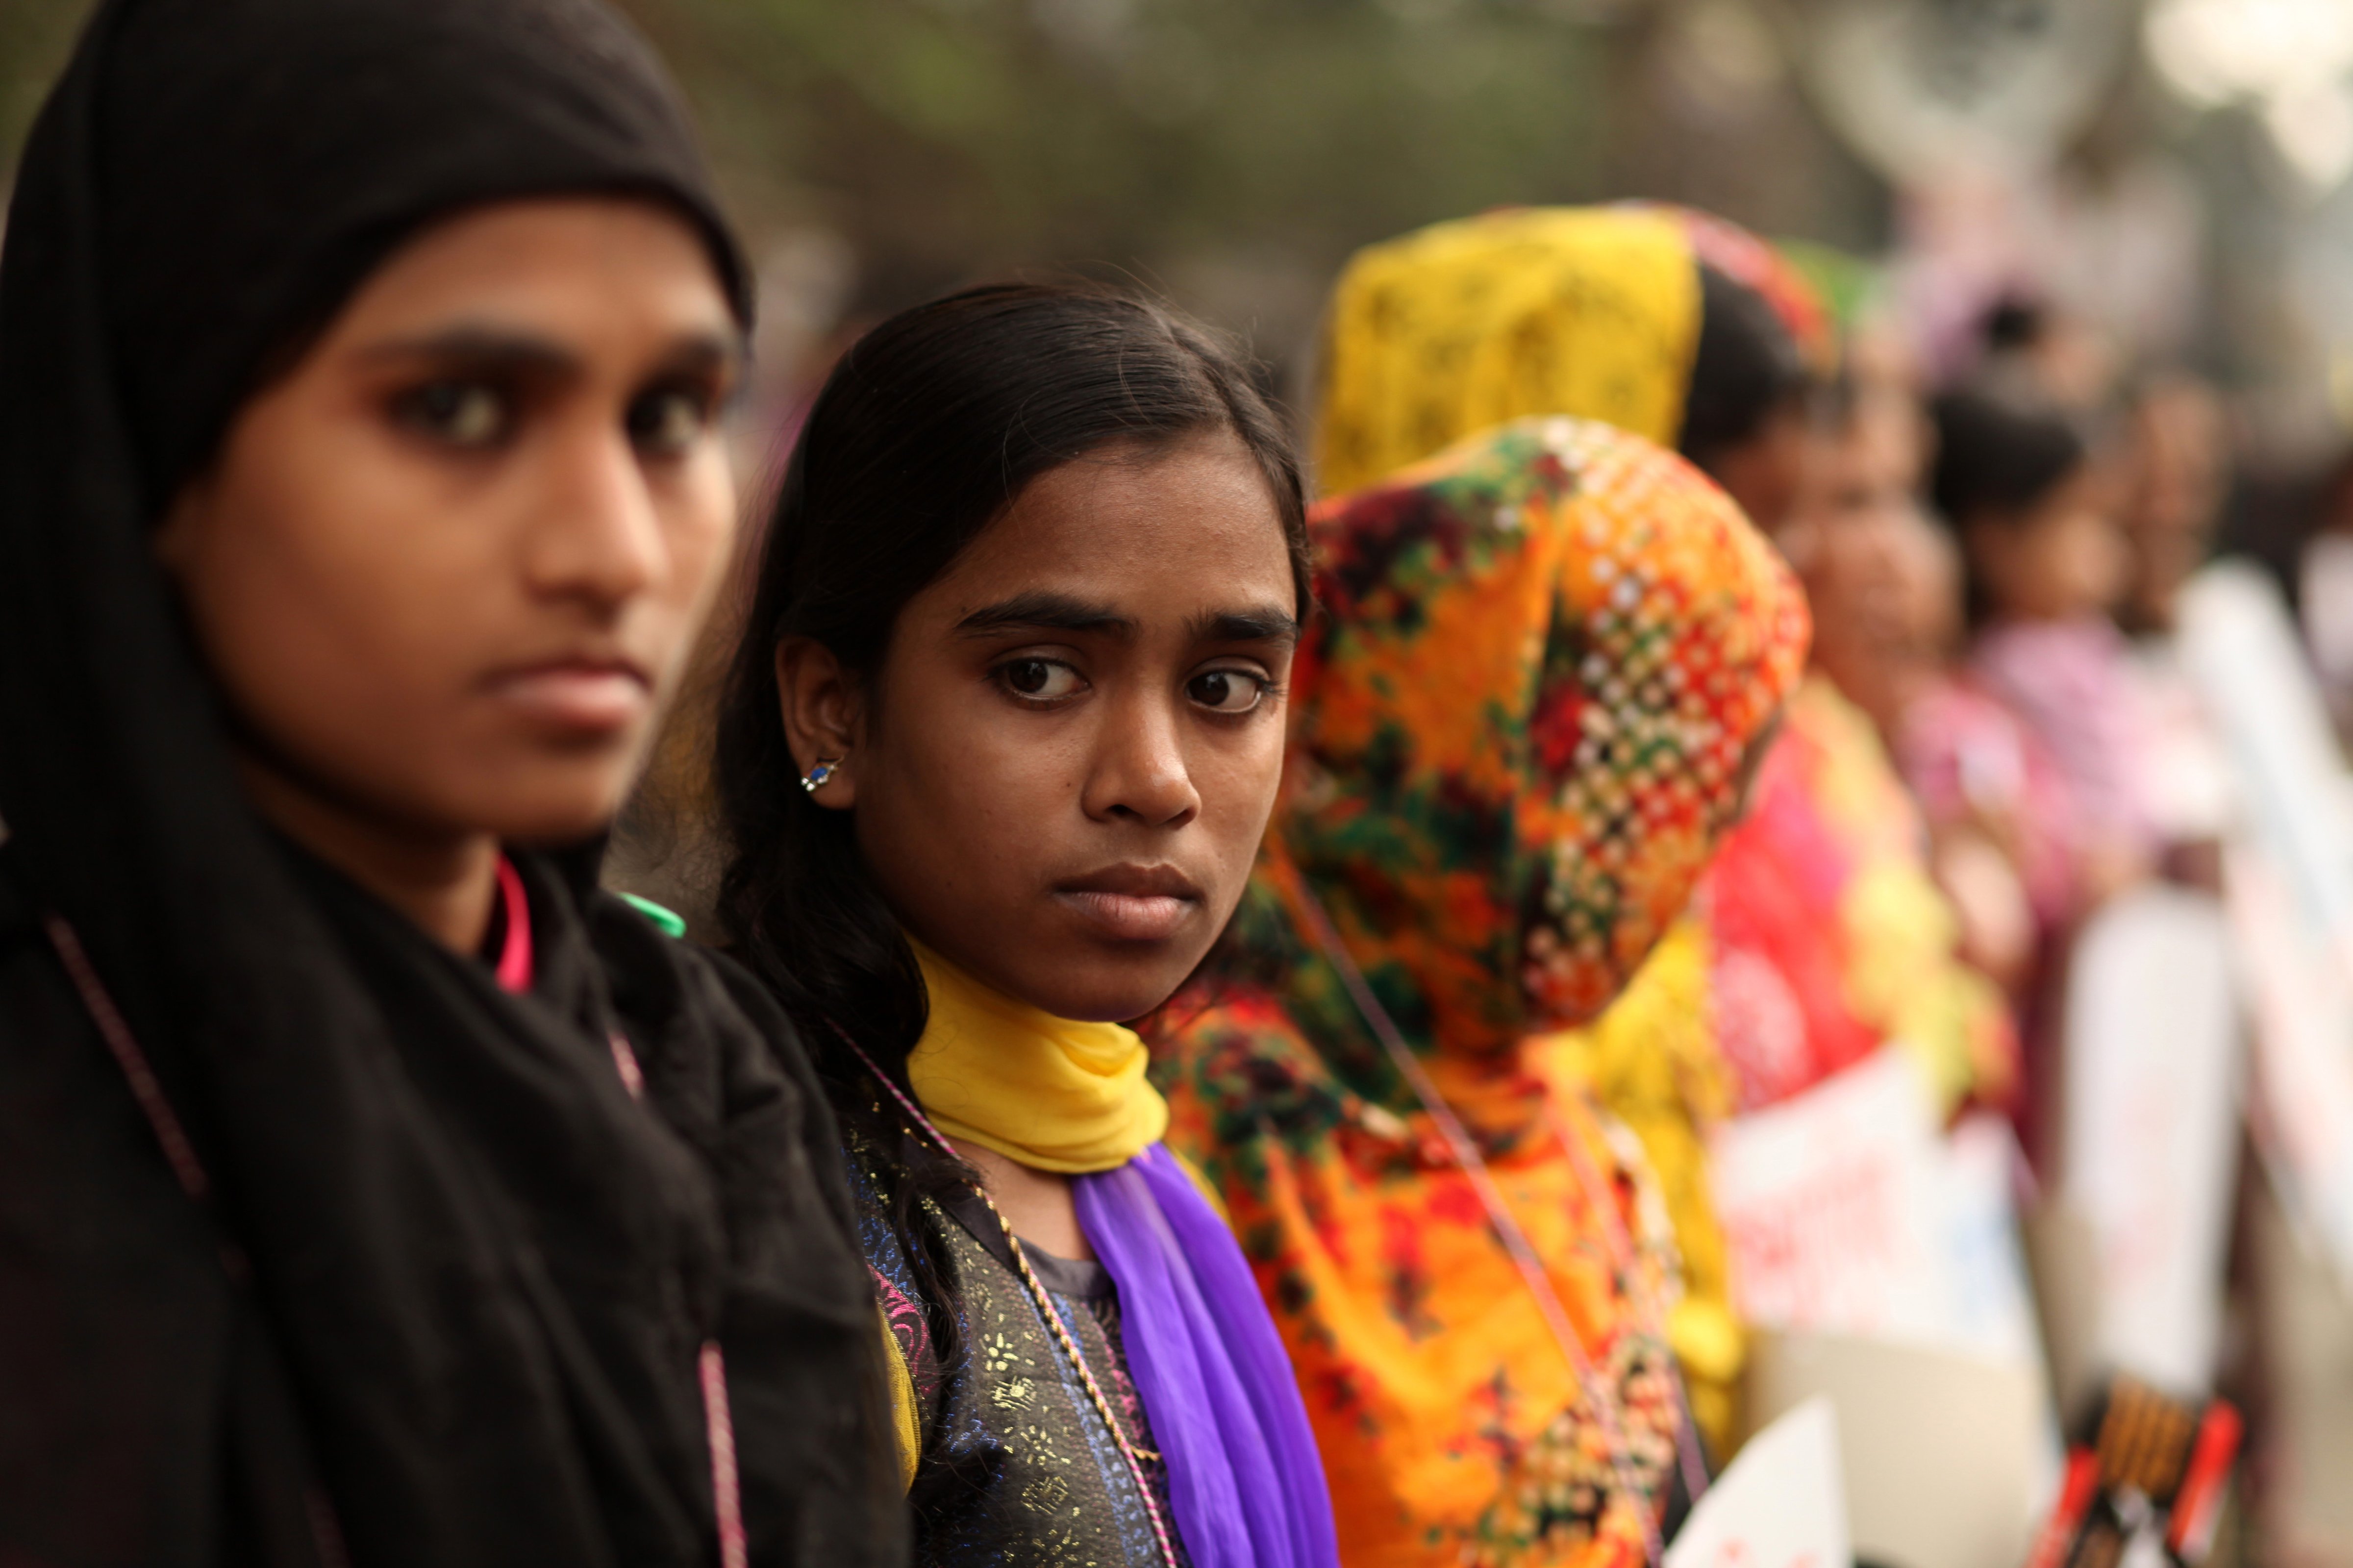 Woman organizations protest against child marriage in front of Press Club in Dhaka, Bangladesh, on Dec. 3, 2014.